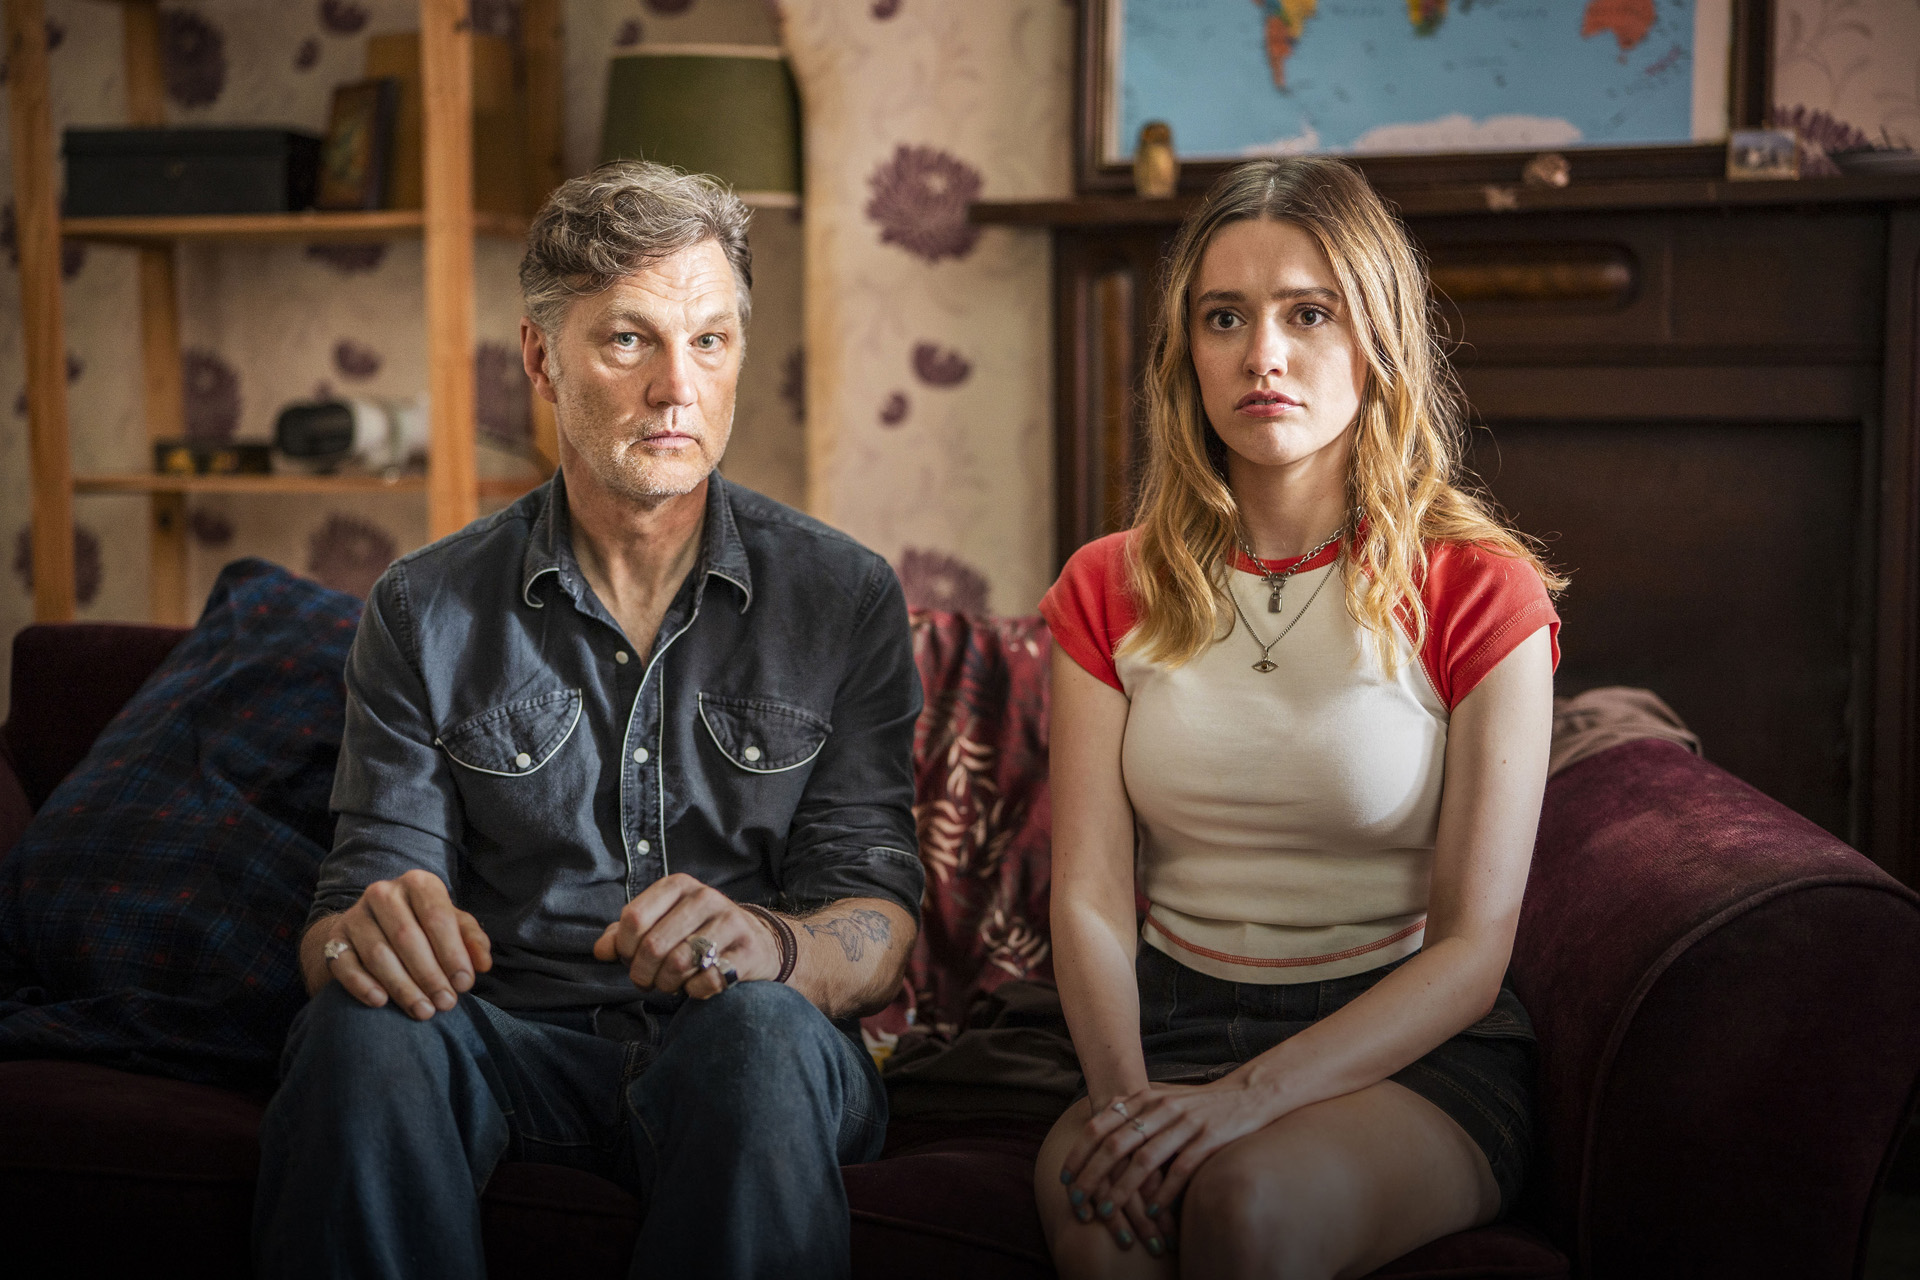 Gemma (Aimee Lou Wood) and Malcolm (David Morrissey) in Daddy Issues